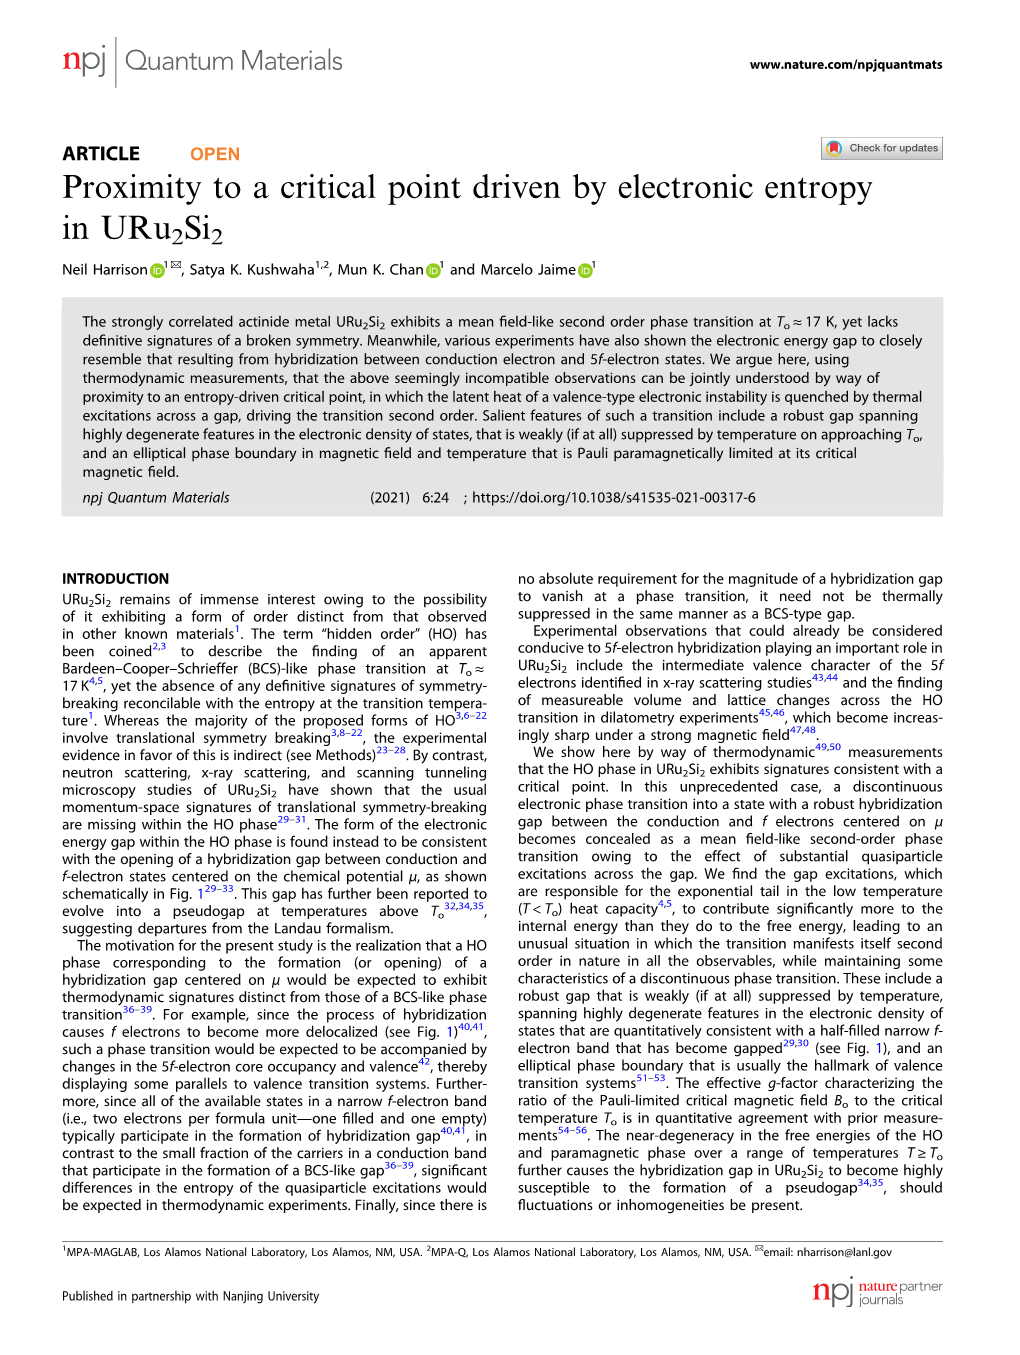 Proximity to a Critical Point Driven by Electronic Entropy in Uru2si2